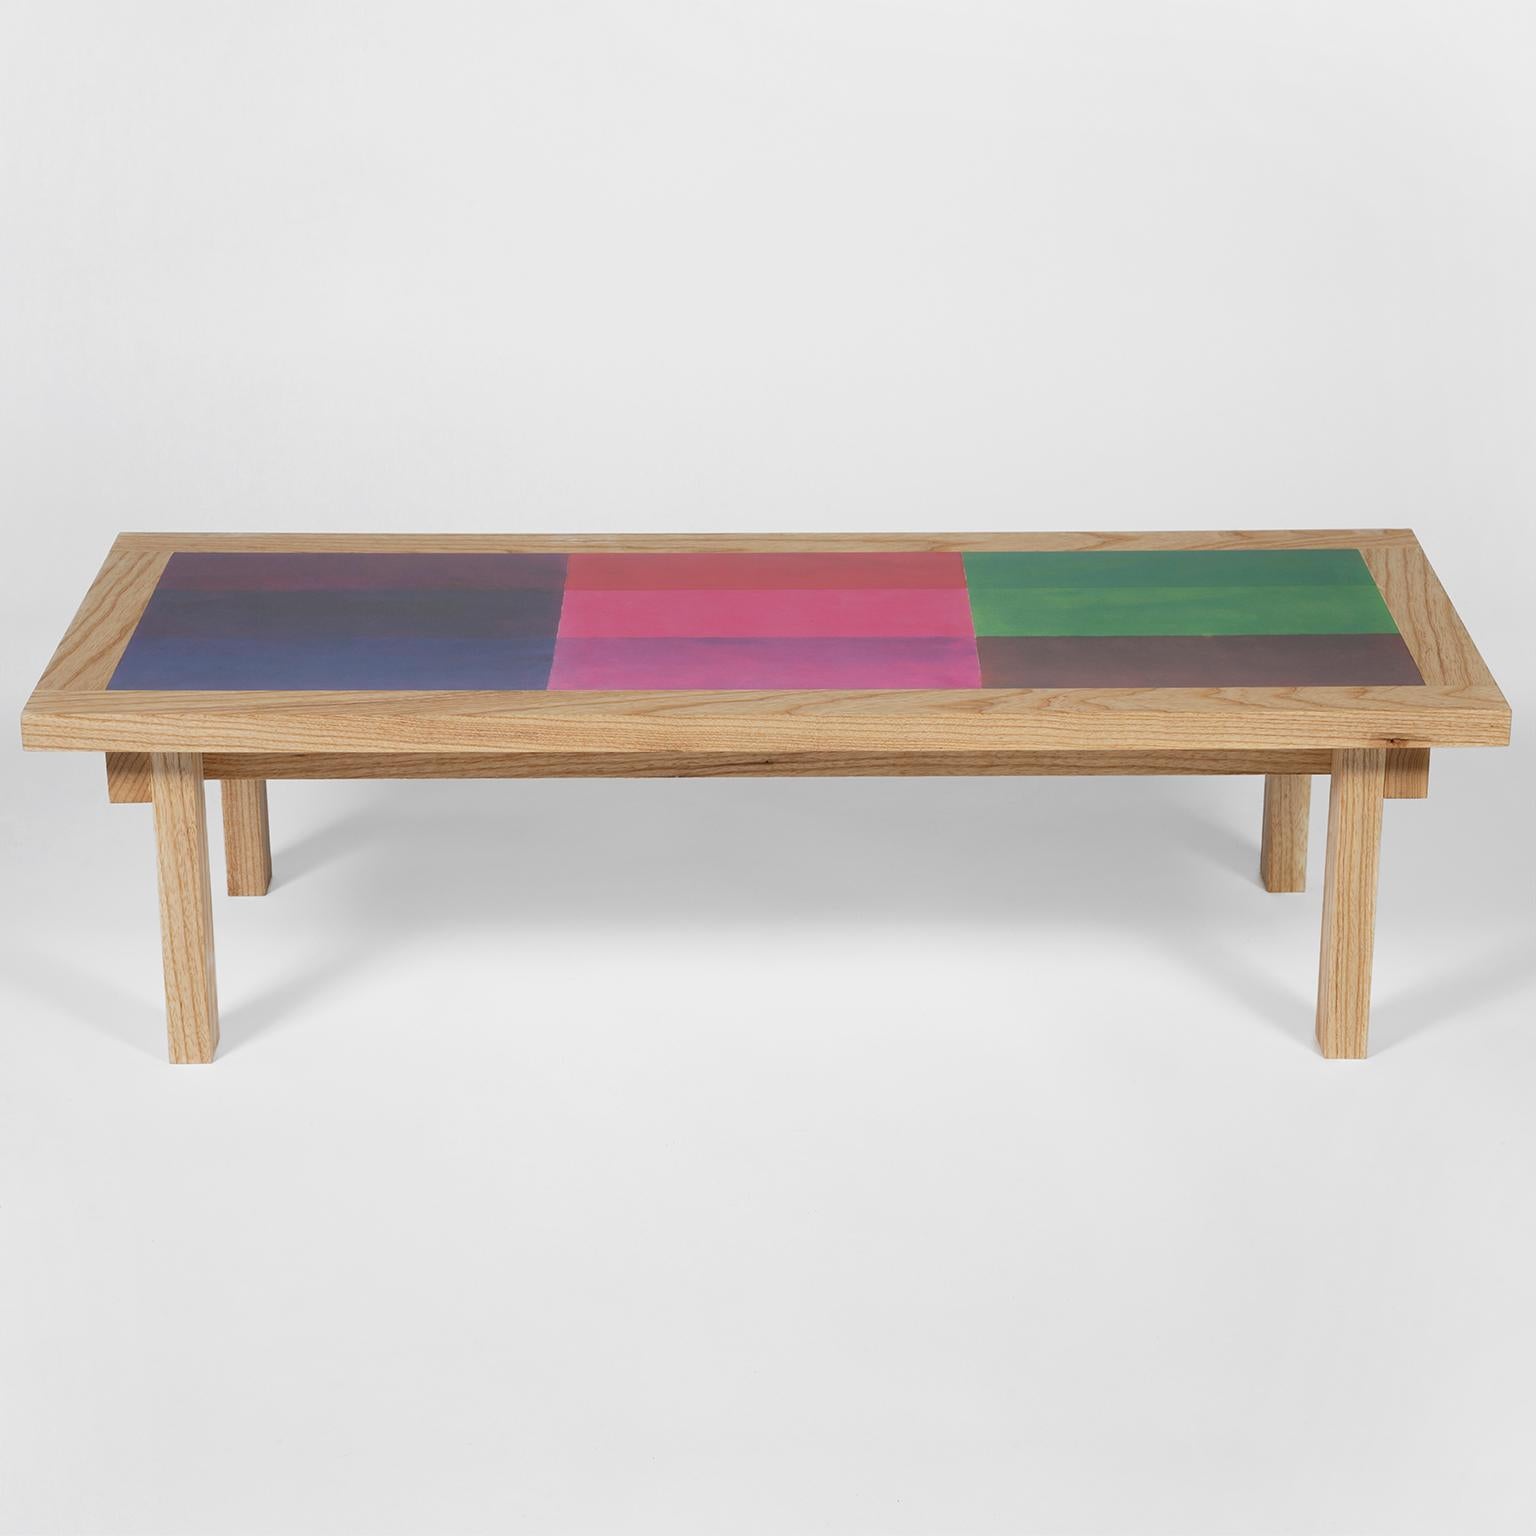 Nine Colored Blocks Table by DANAD Design 'Robyn Denny' In New Condition For Sale In London, GB